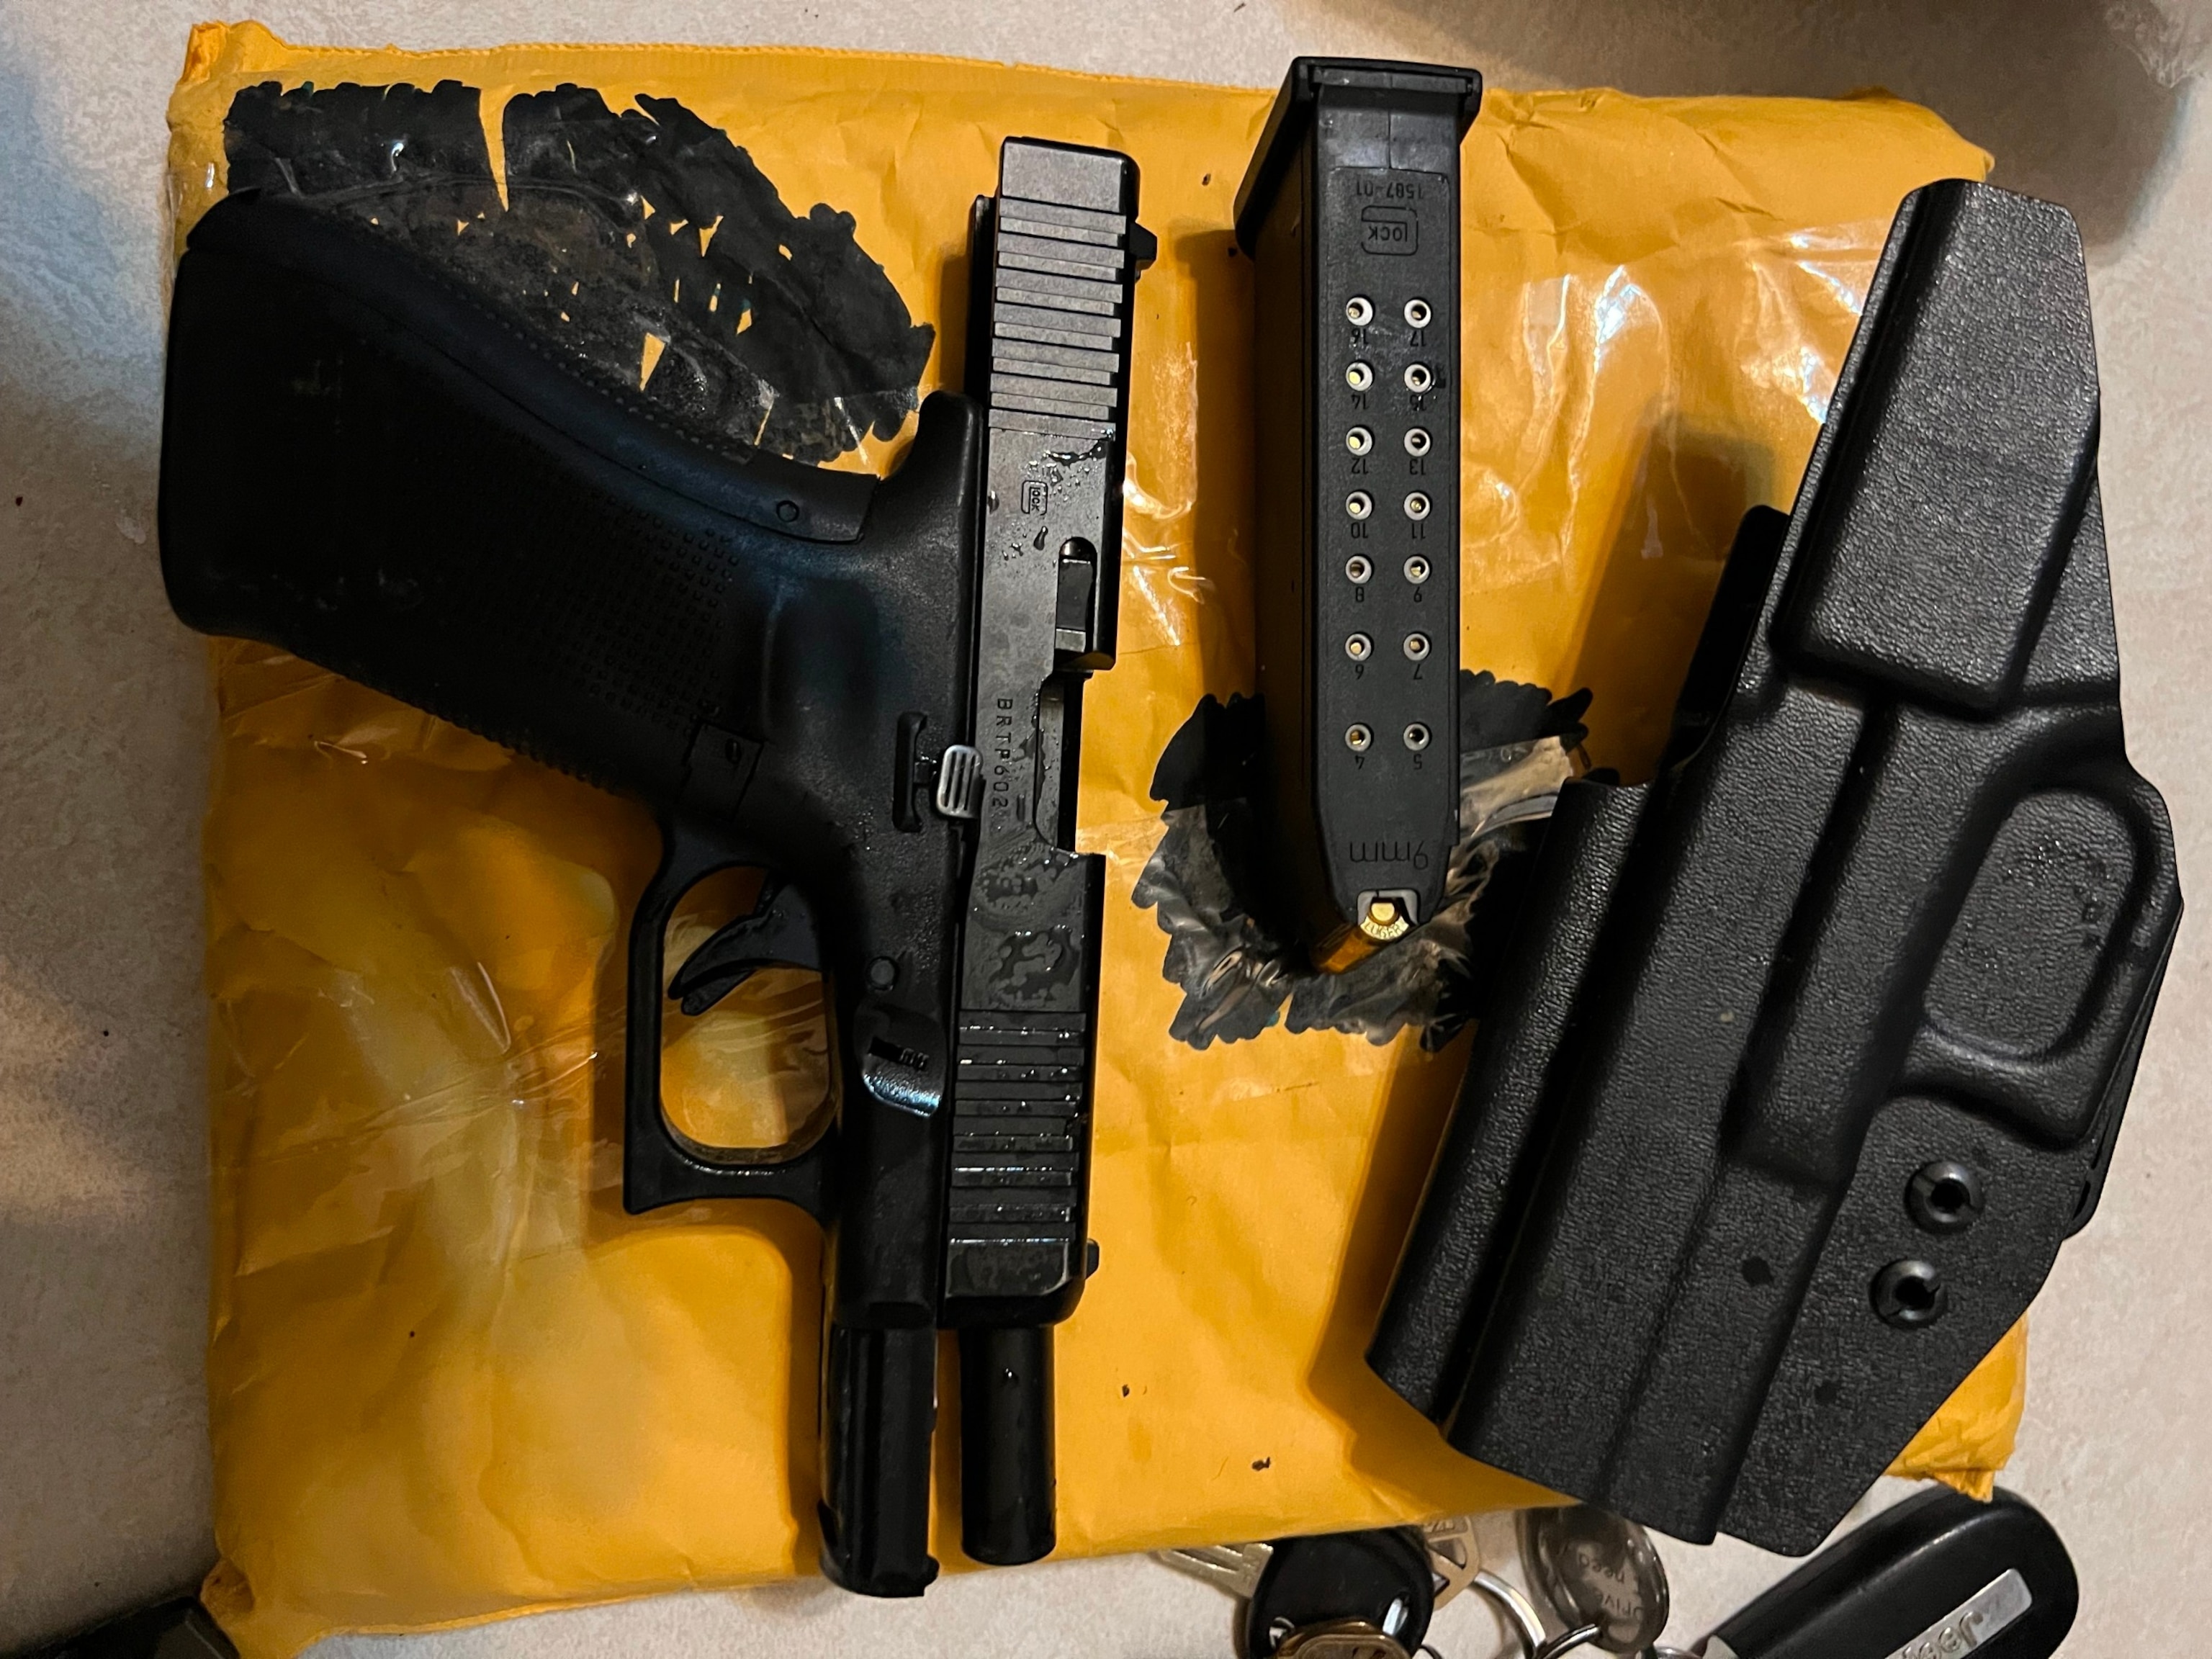 PHOTO: Items seized during an investigation into contraband are seen in a photo released by the Georgia Department of Corrections.